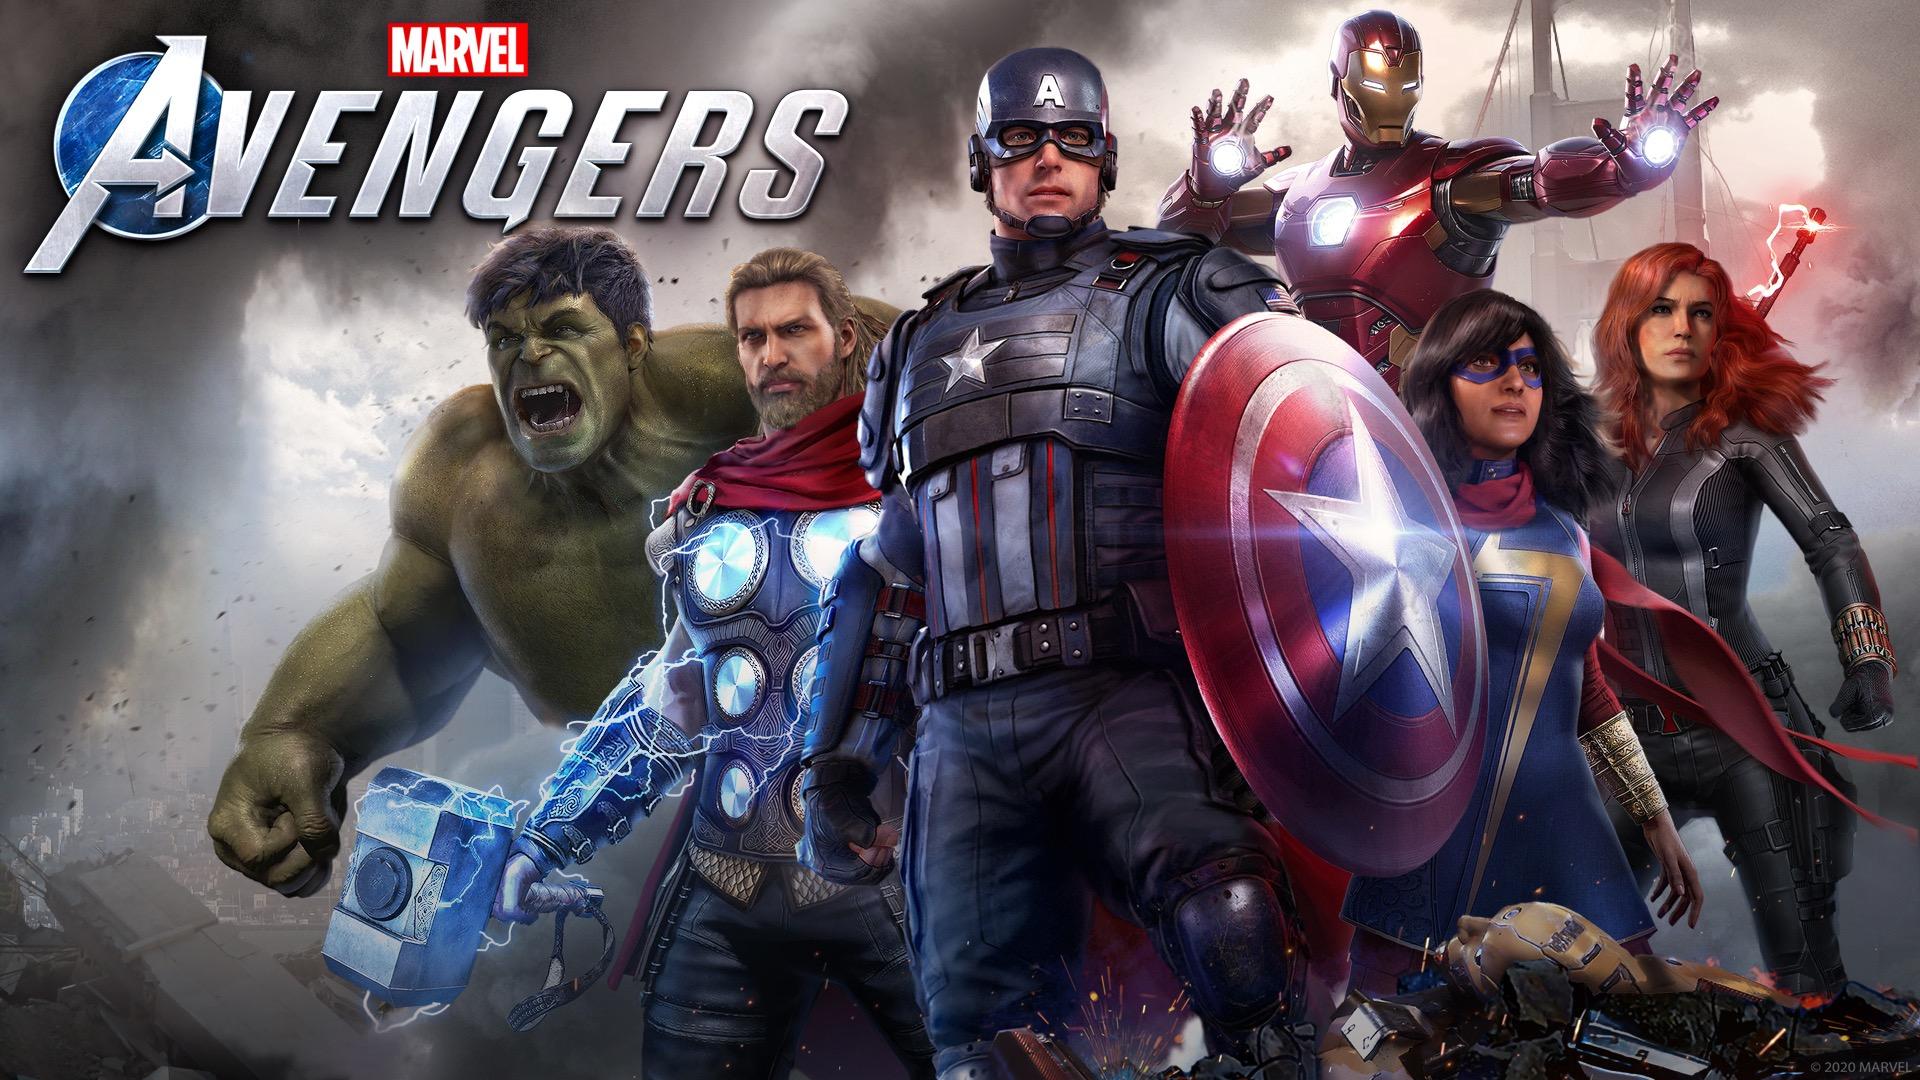 Here’s A Deep Dive Into The Upcoming Marvel’s Avengers Game